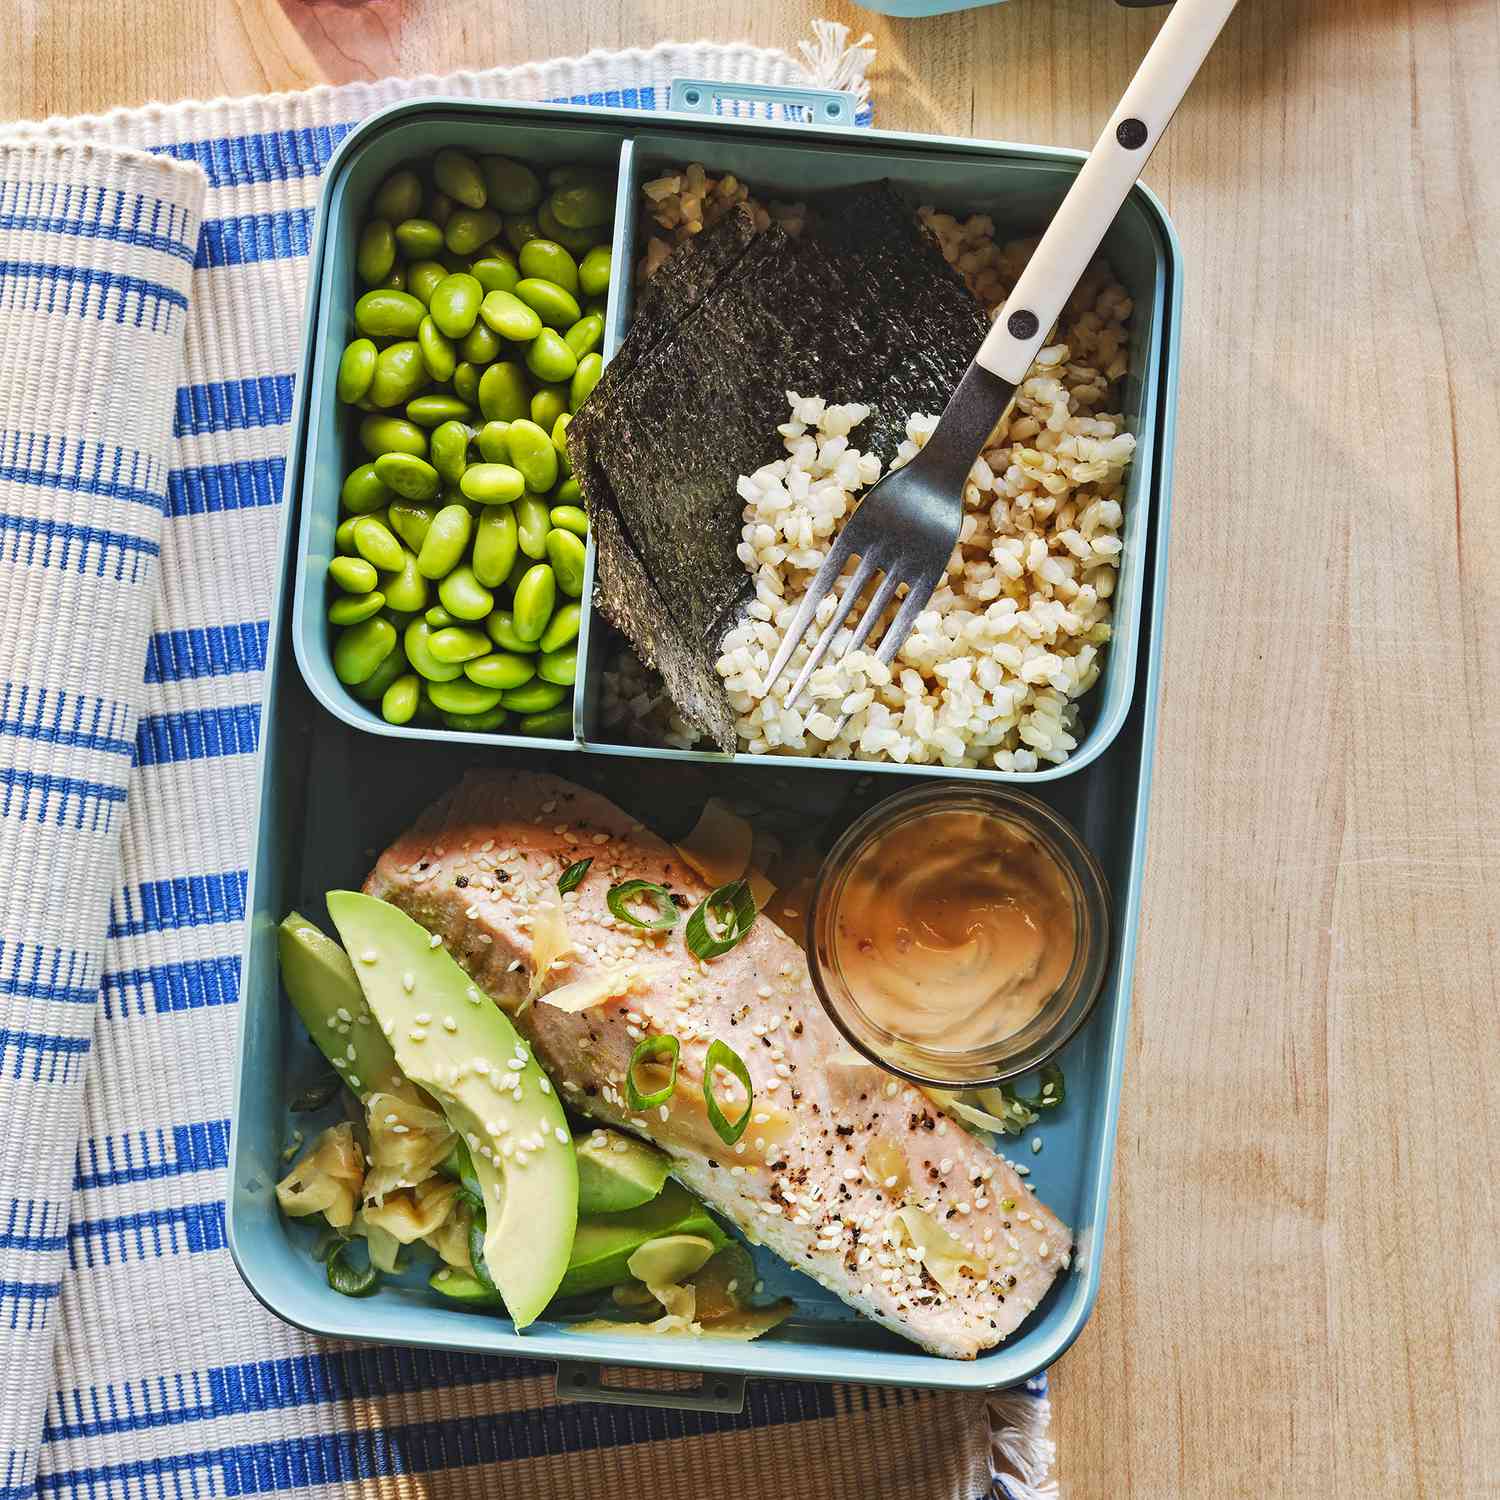 21 Diabetes-Friendly Lunches to Help Reduce Inflammation